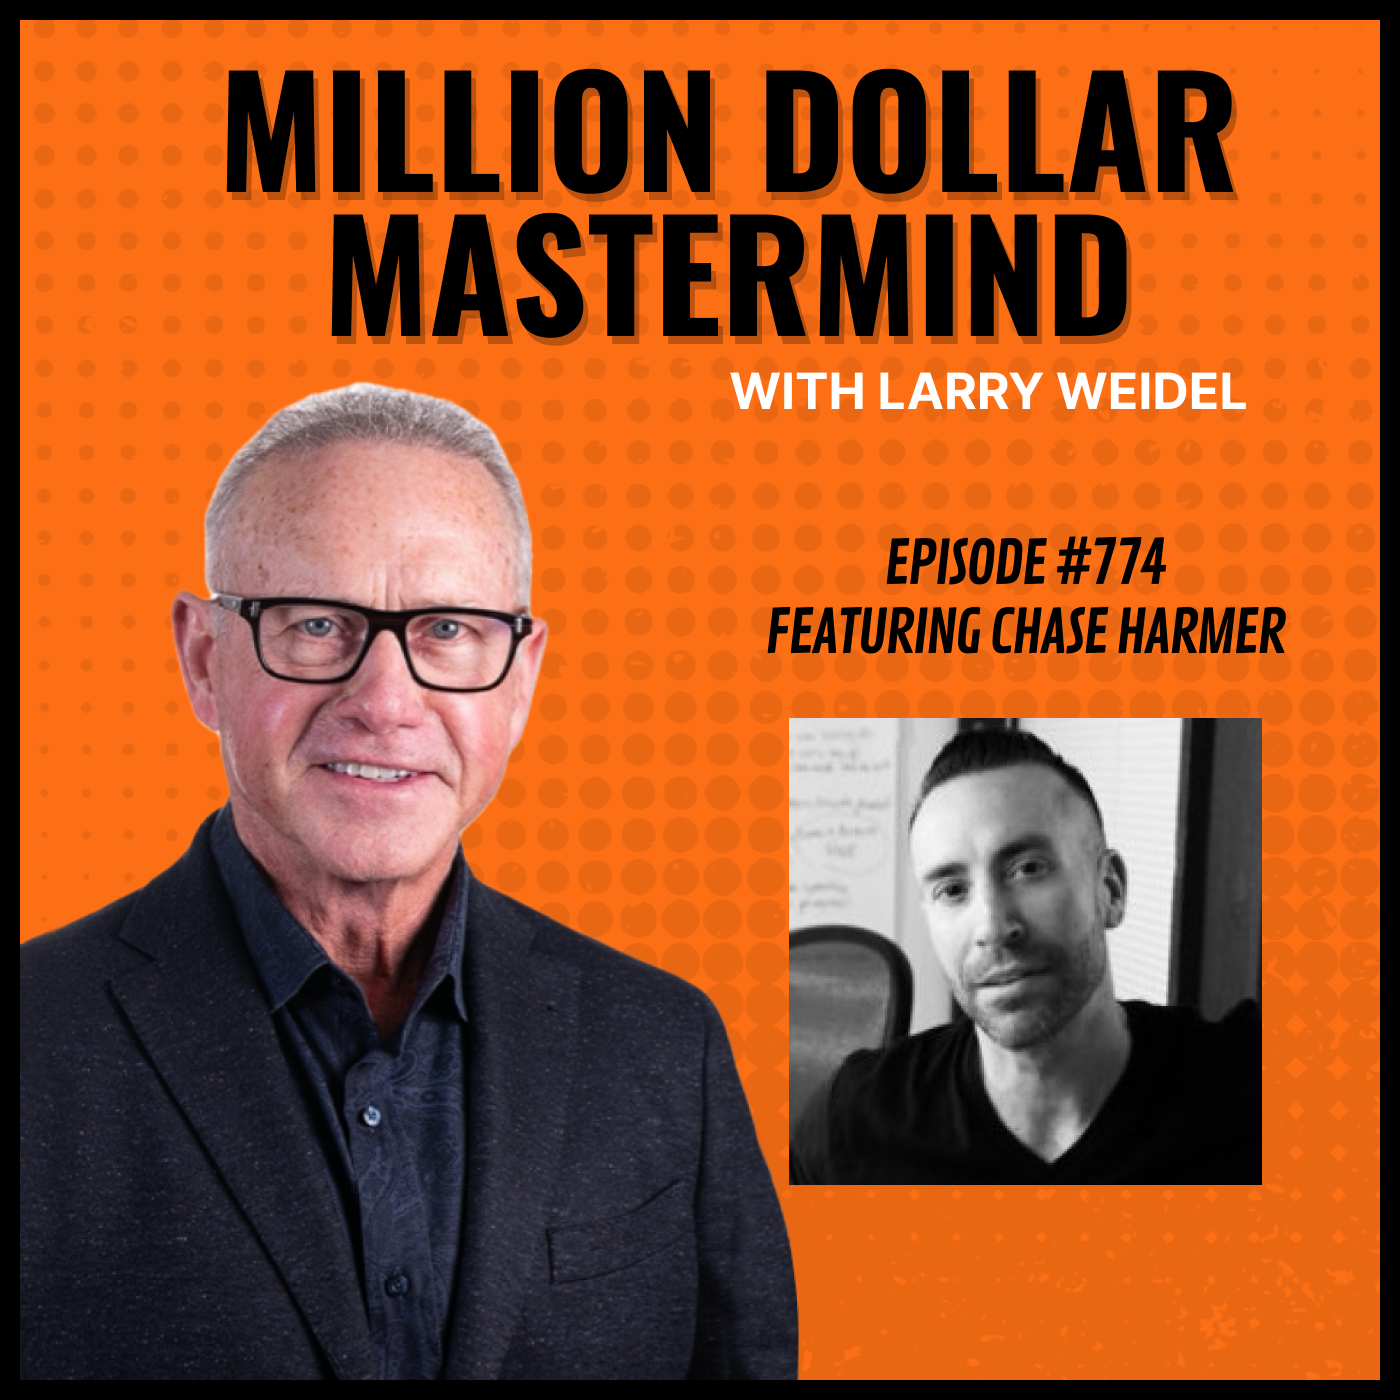 Episode #774 - From Shoe Patents To Payments Innovations with Chase Harmer